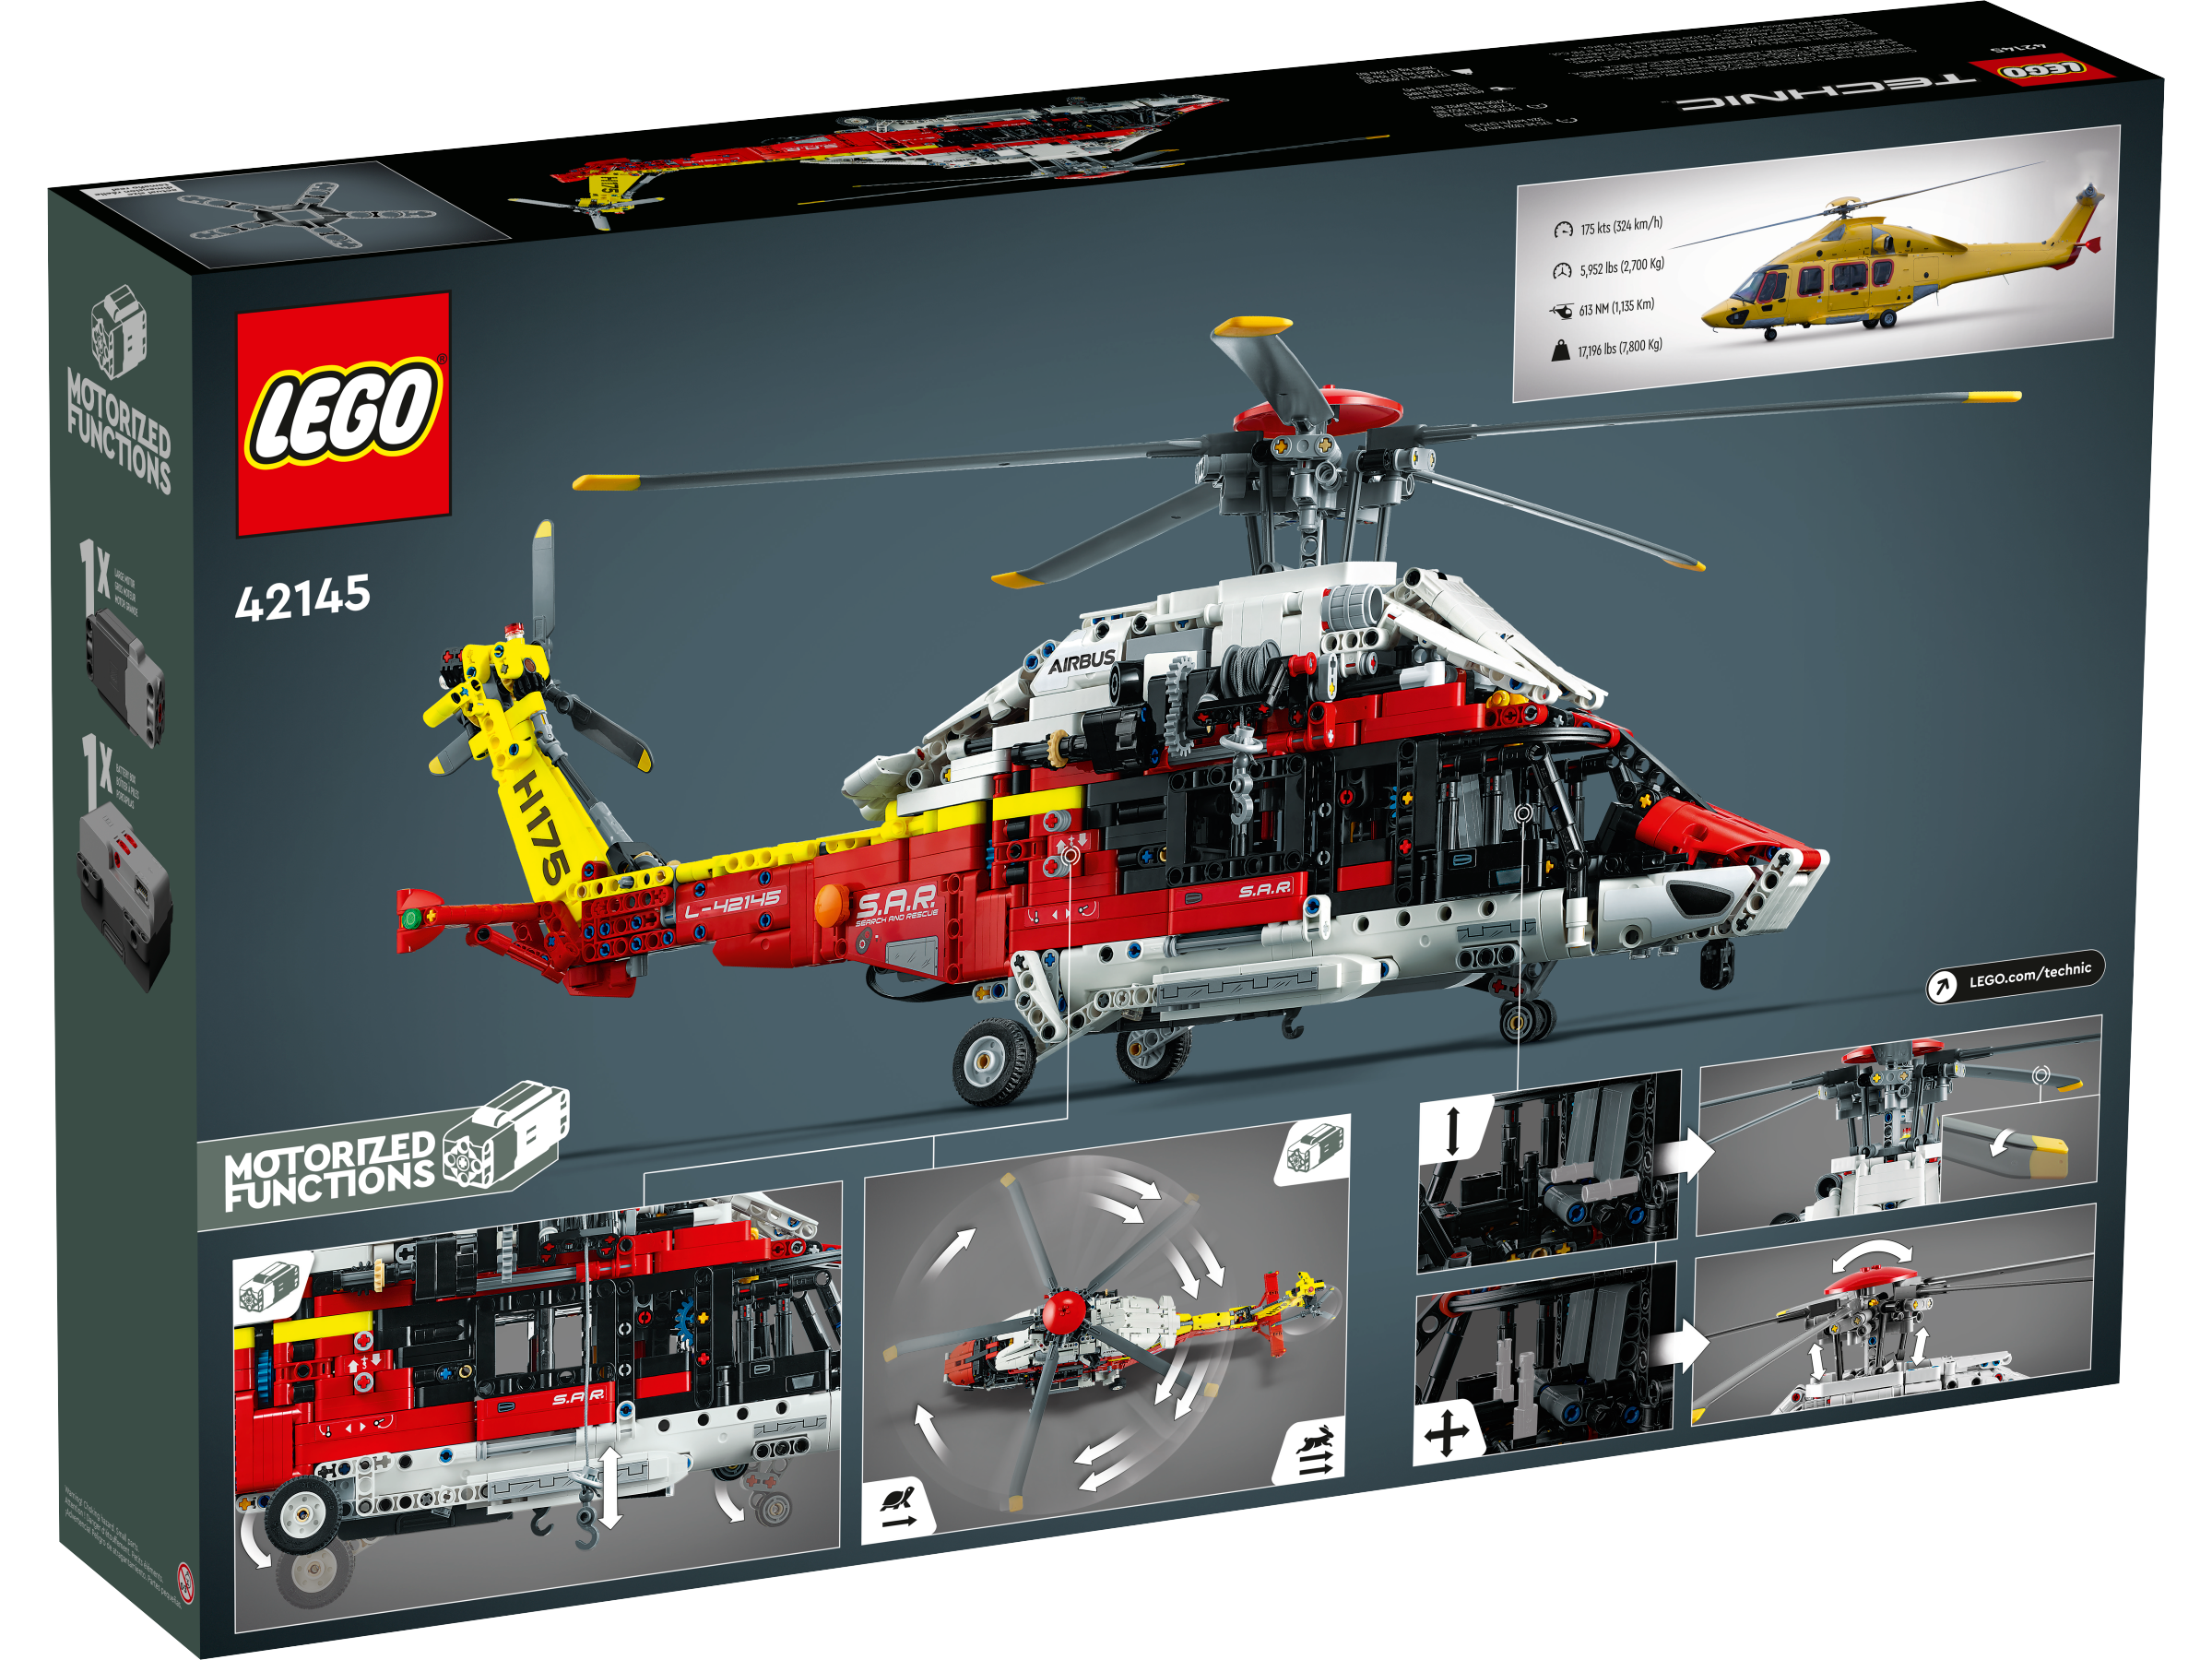 Airbus H175 Rescue Helicopter 42145, Technic™